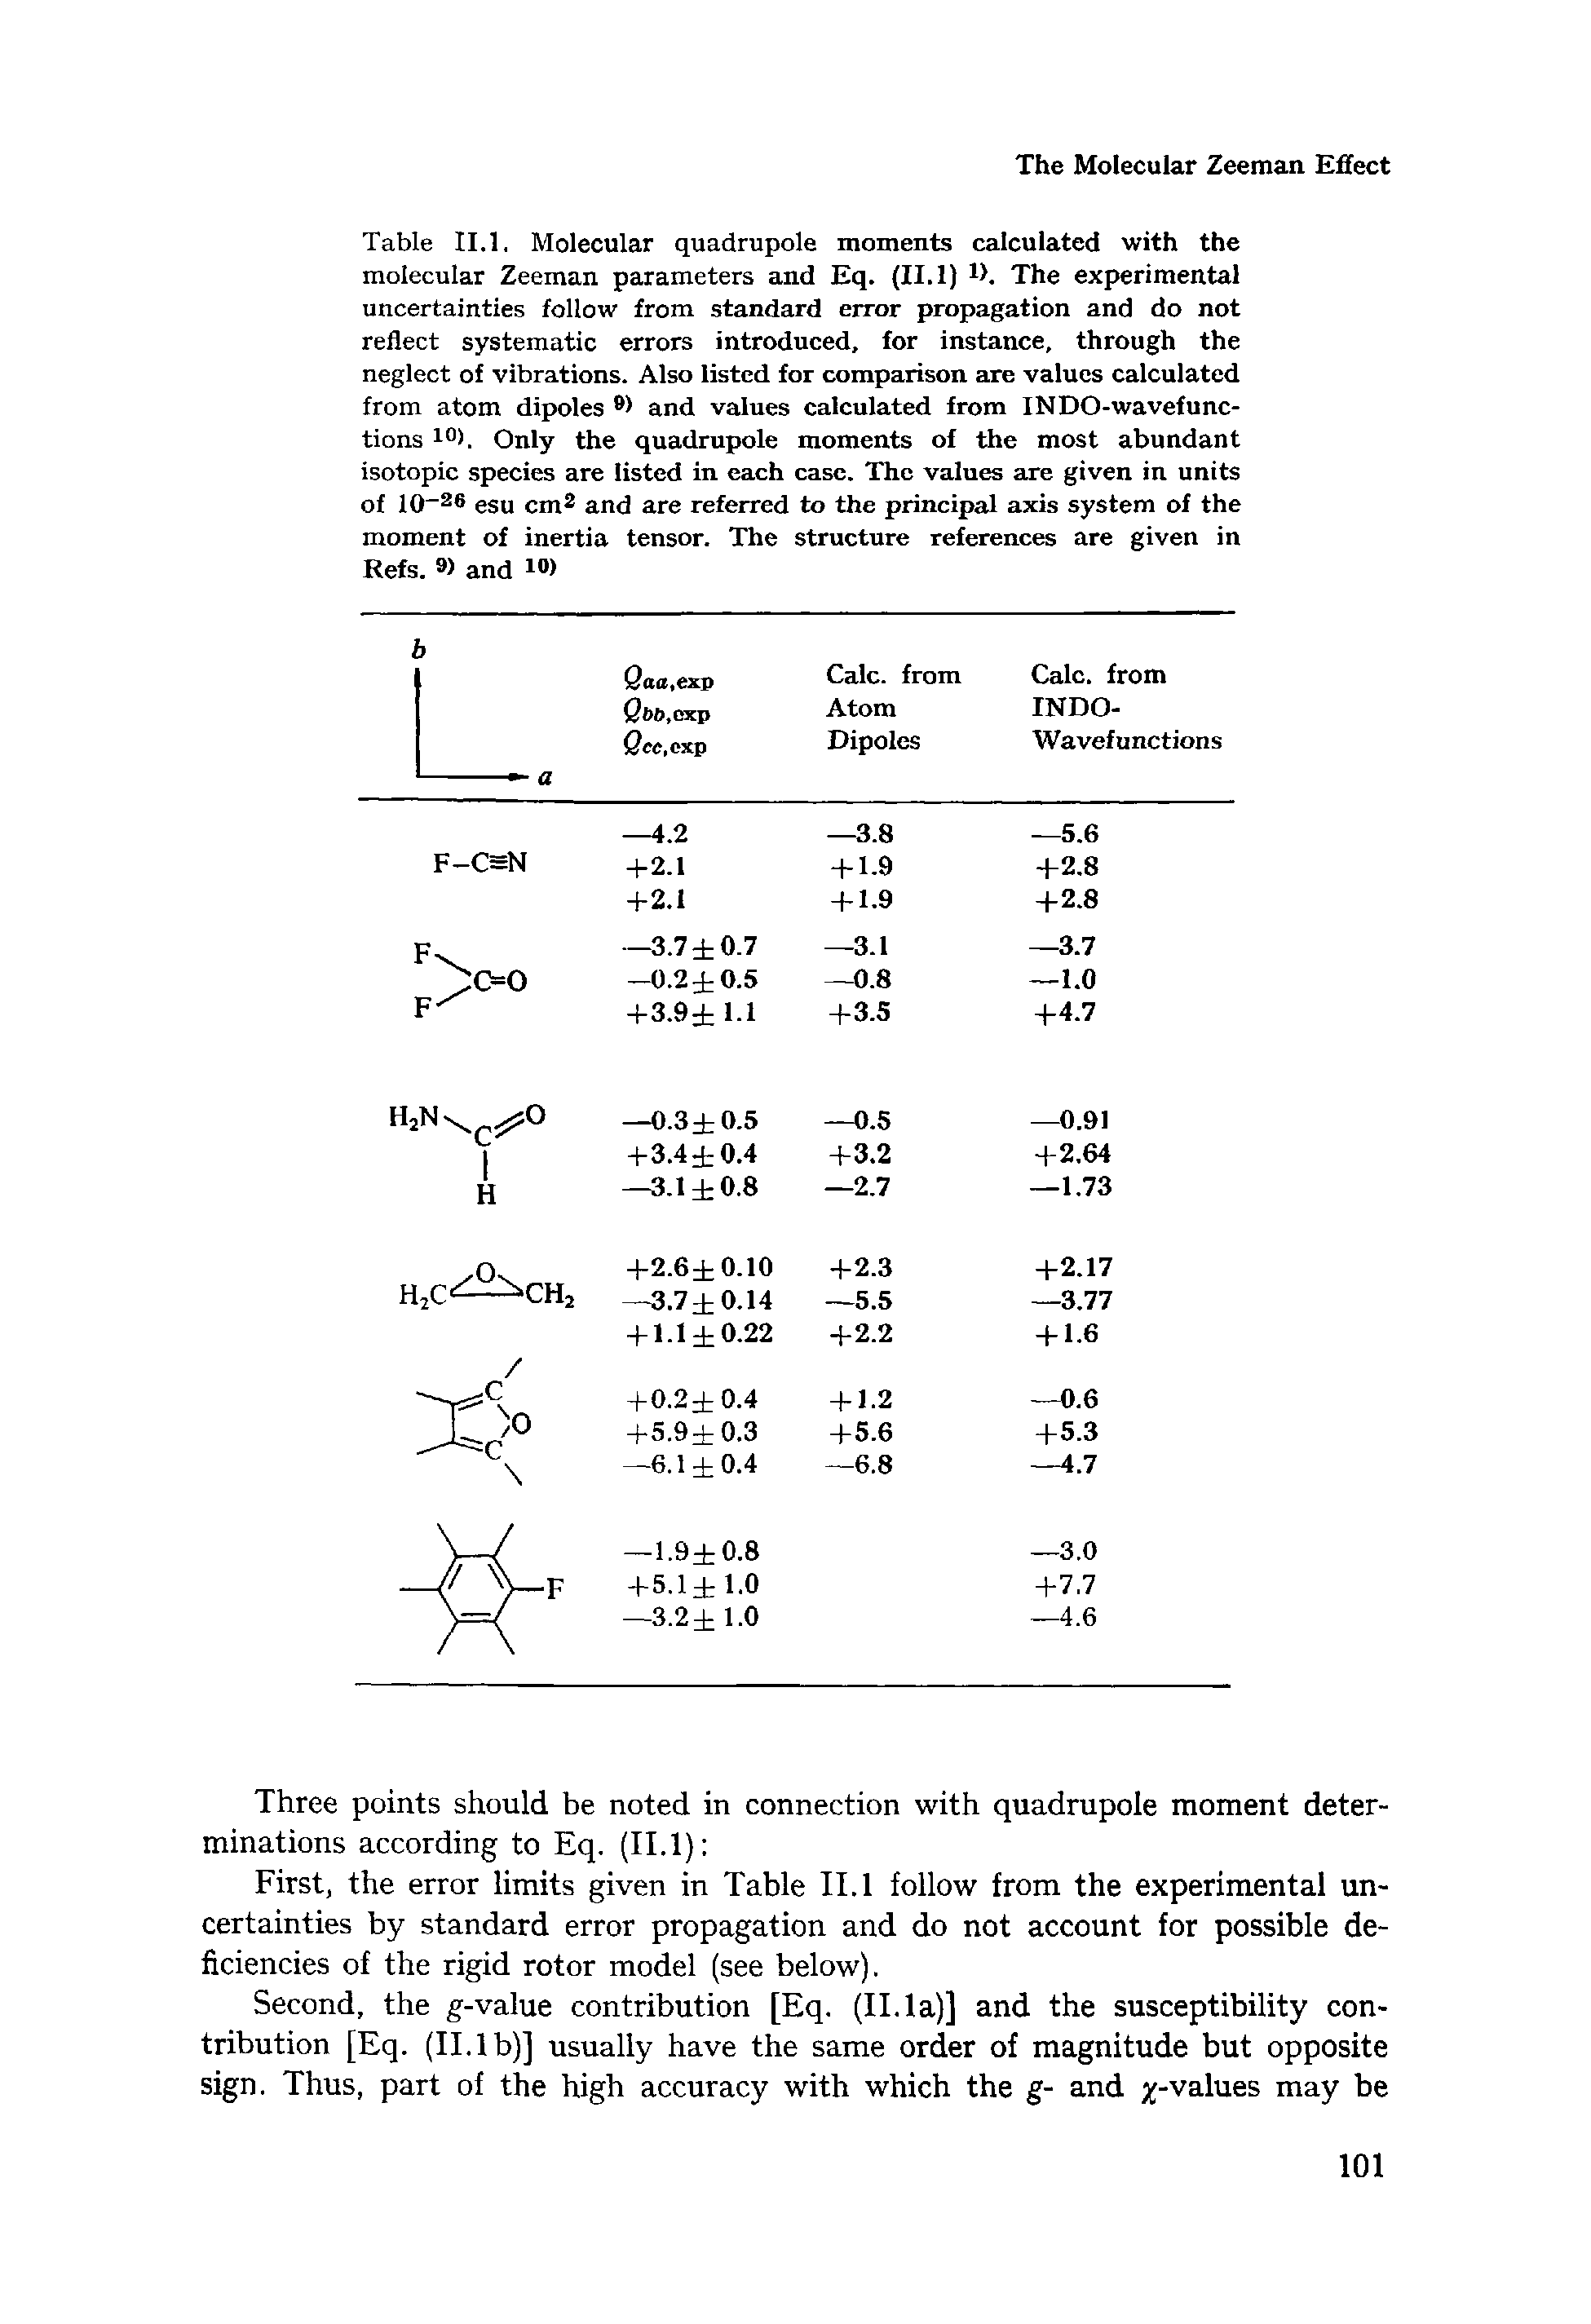 Table II.1. Molecular quadrupole moments calculated with the molecular Zeeman parameters and Eq. (II. 1) H. The experimental uncertainties follow from standard error propagation and do not reflect systematic errors introduced, for instance, through the neglect of vibrations. Also listed for comparison are values calculated from atom dipoles and values calculated from INDO-wavefunc-tions 10). Only the quadrupole moments of the most abundant isotopic species are listed in each case. The values are given in units of 10 28 esu cm and are referred to the principal axis system of the moment of inertia tensor. The structure references are given in Refs. 9) and i )...